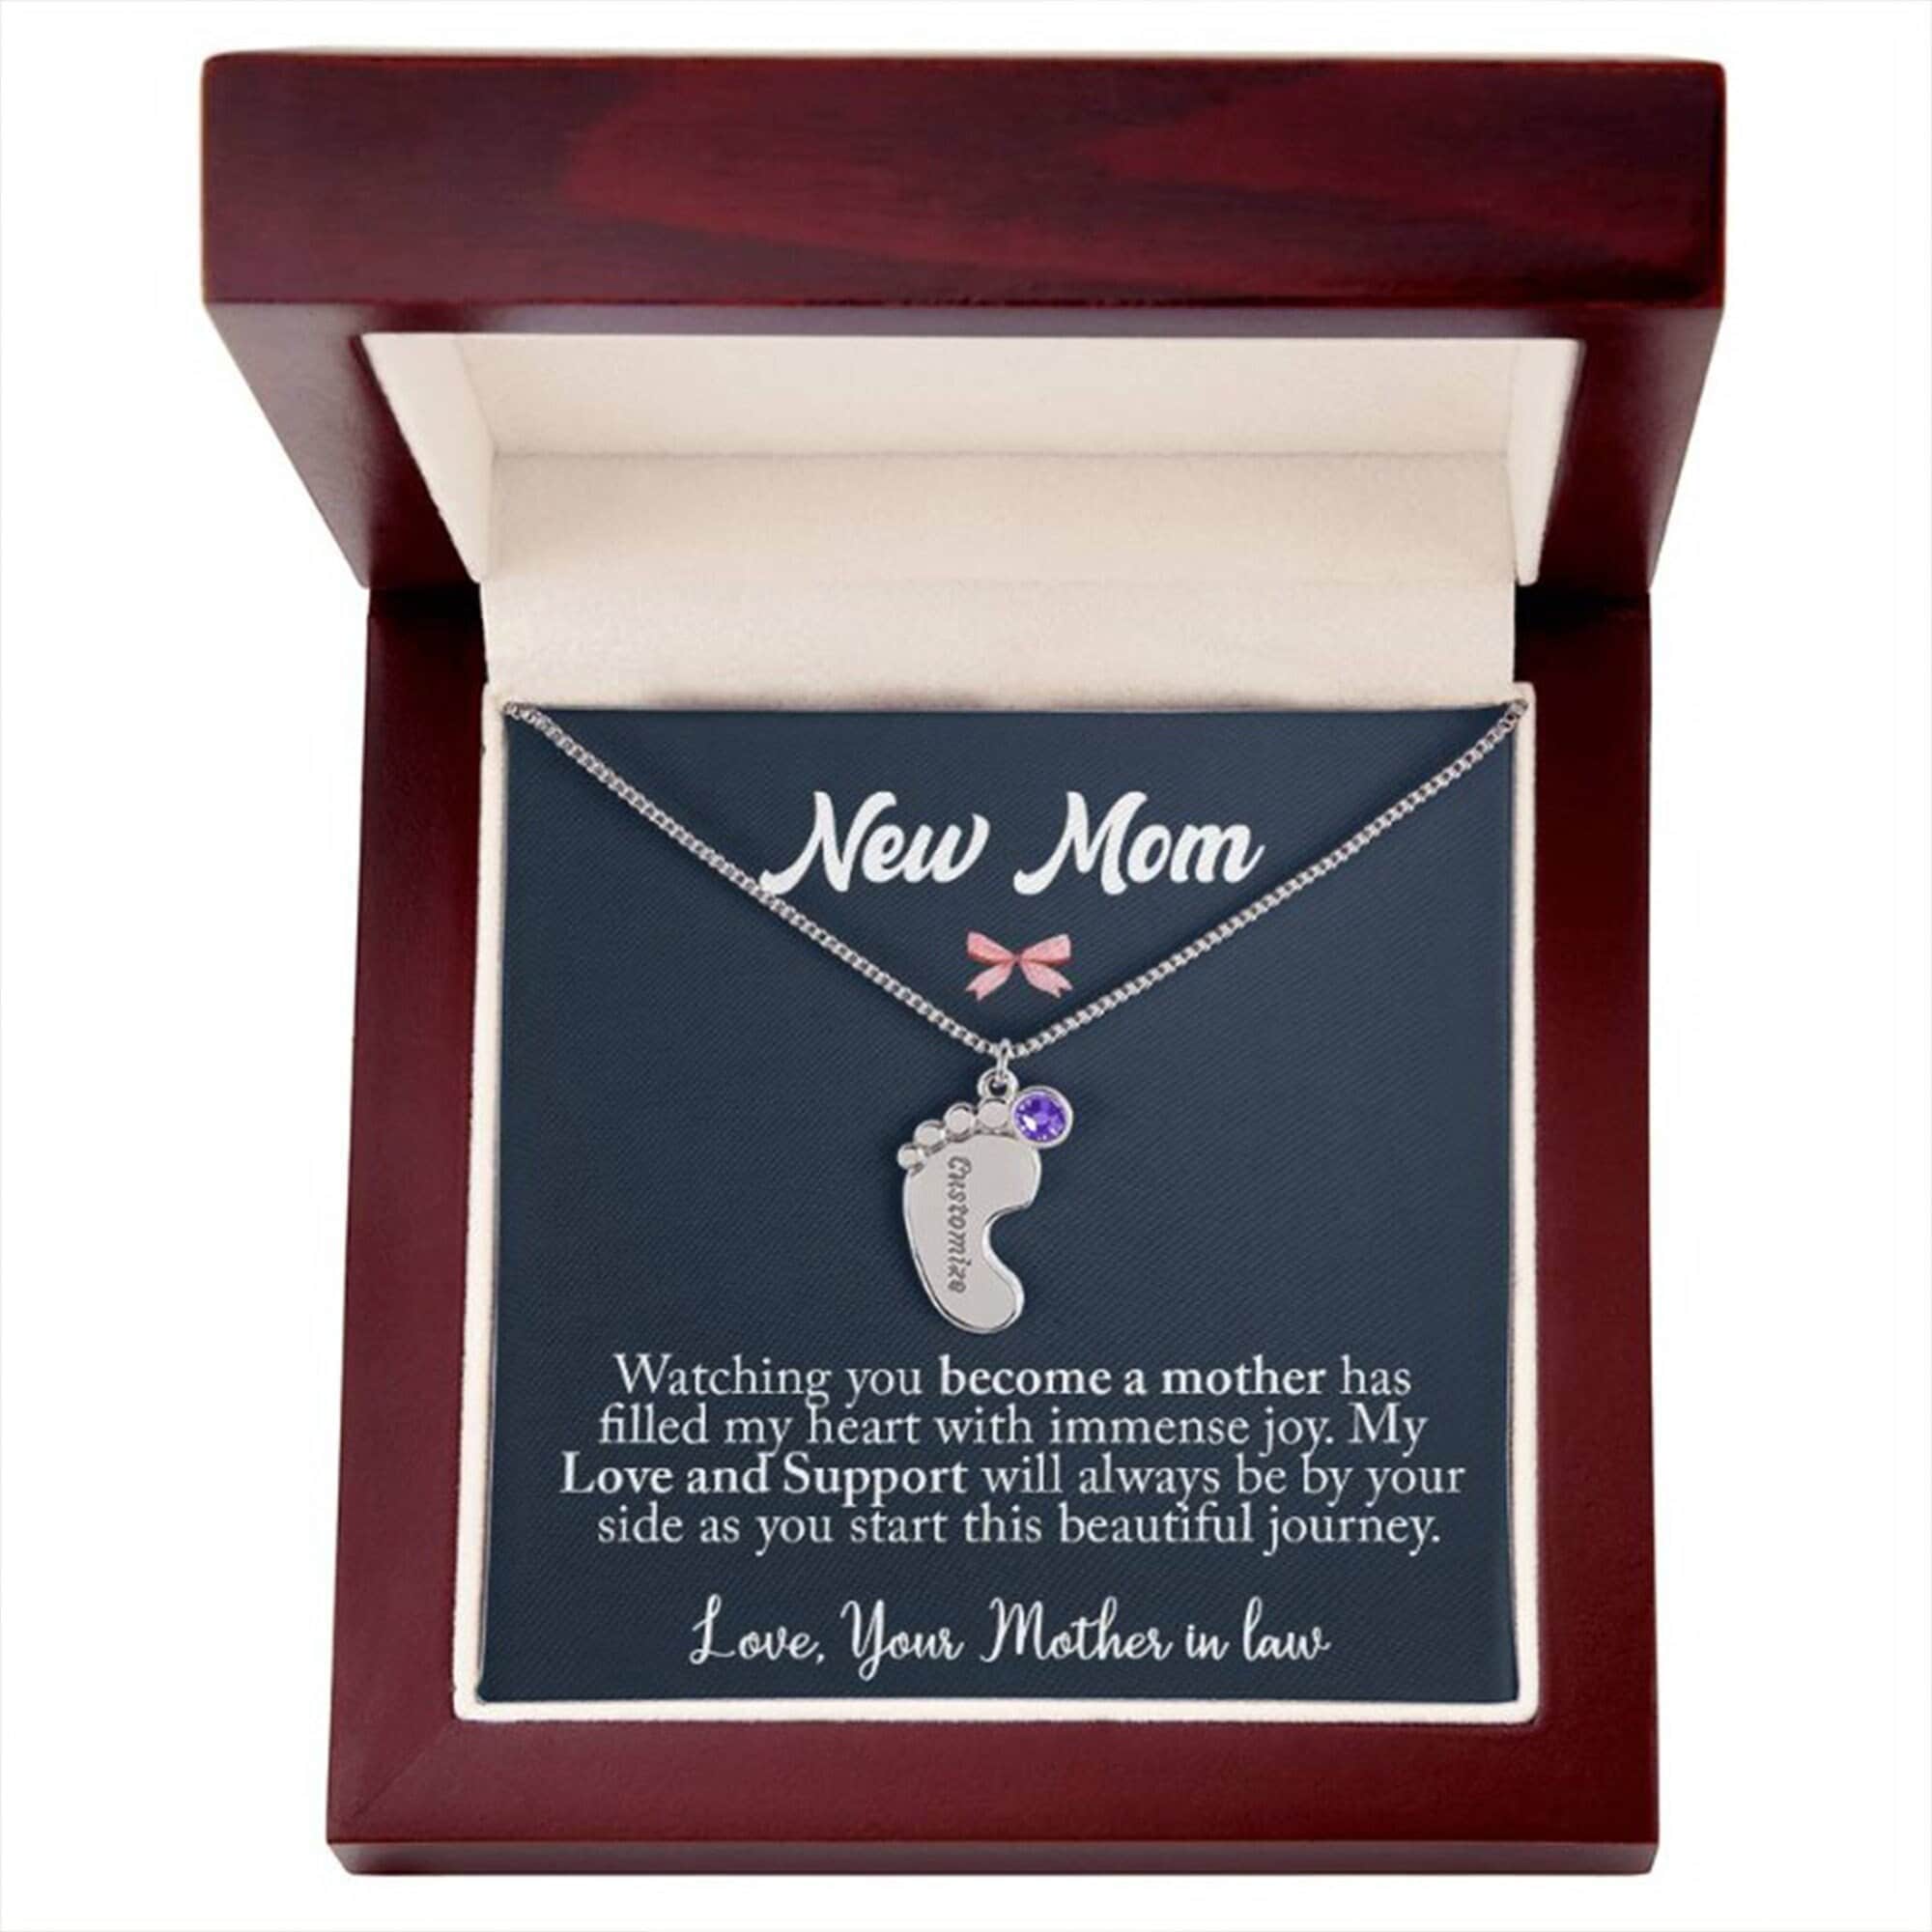 New Parents Gift Box Set, Couples Gift Mom to Be Gifts, Baby